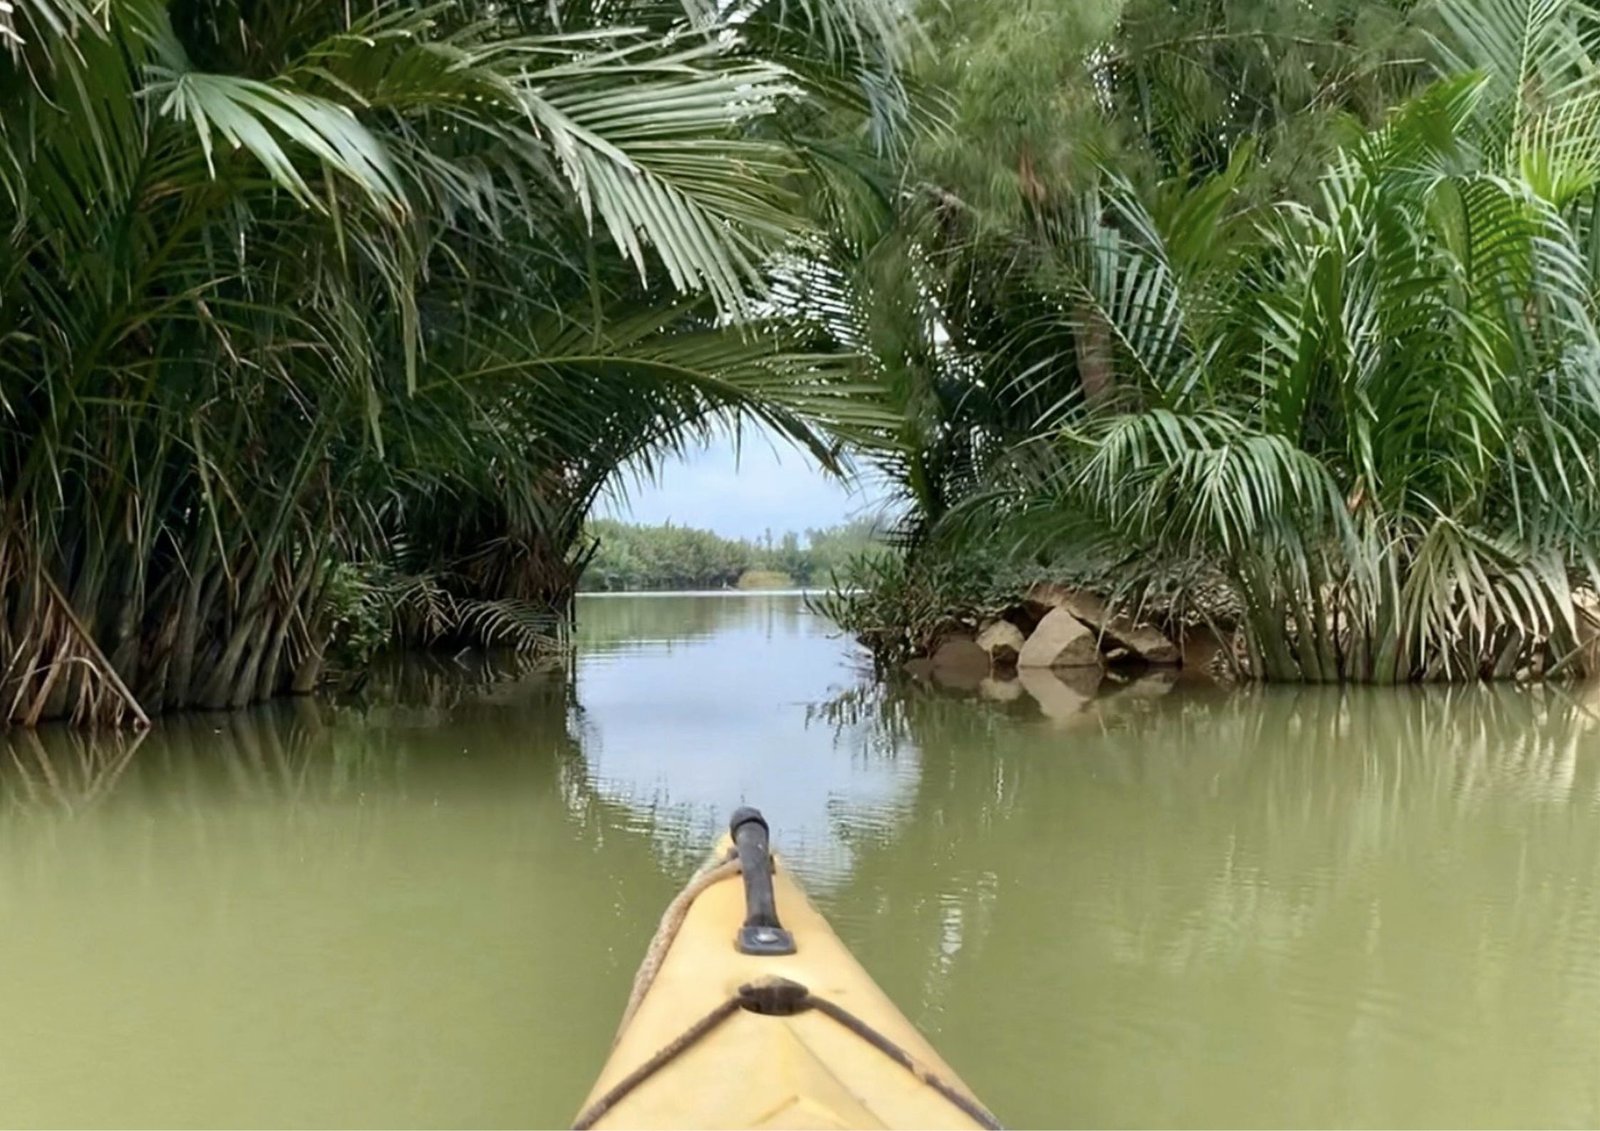 Virtual Kayaking to Cocopal Forest